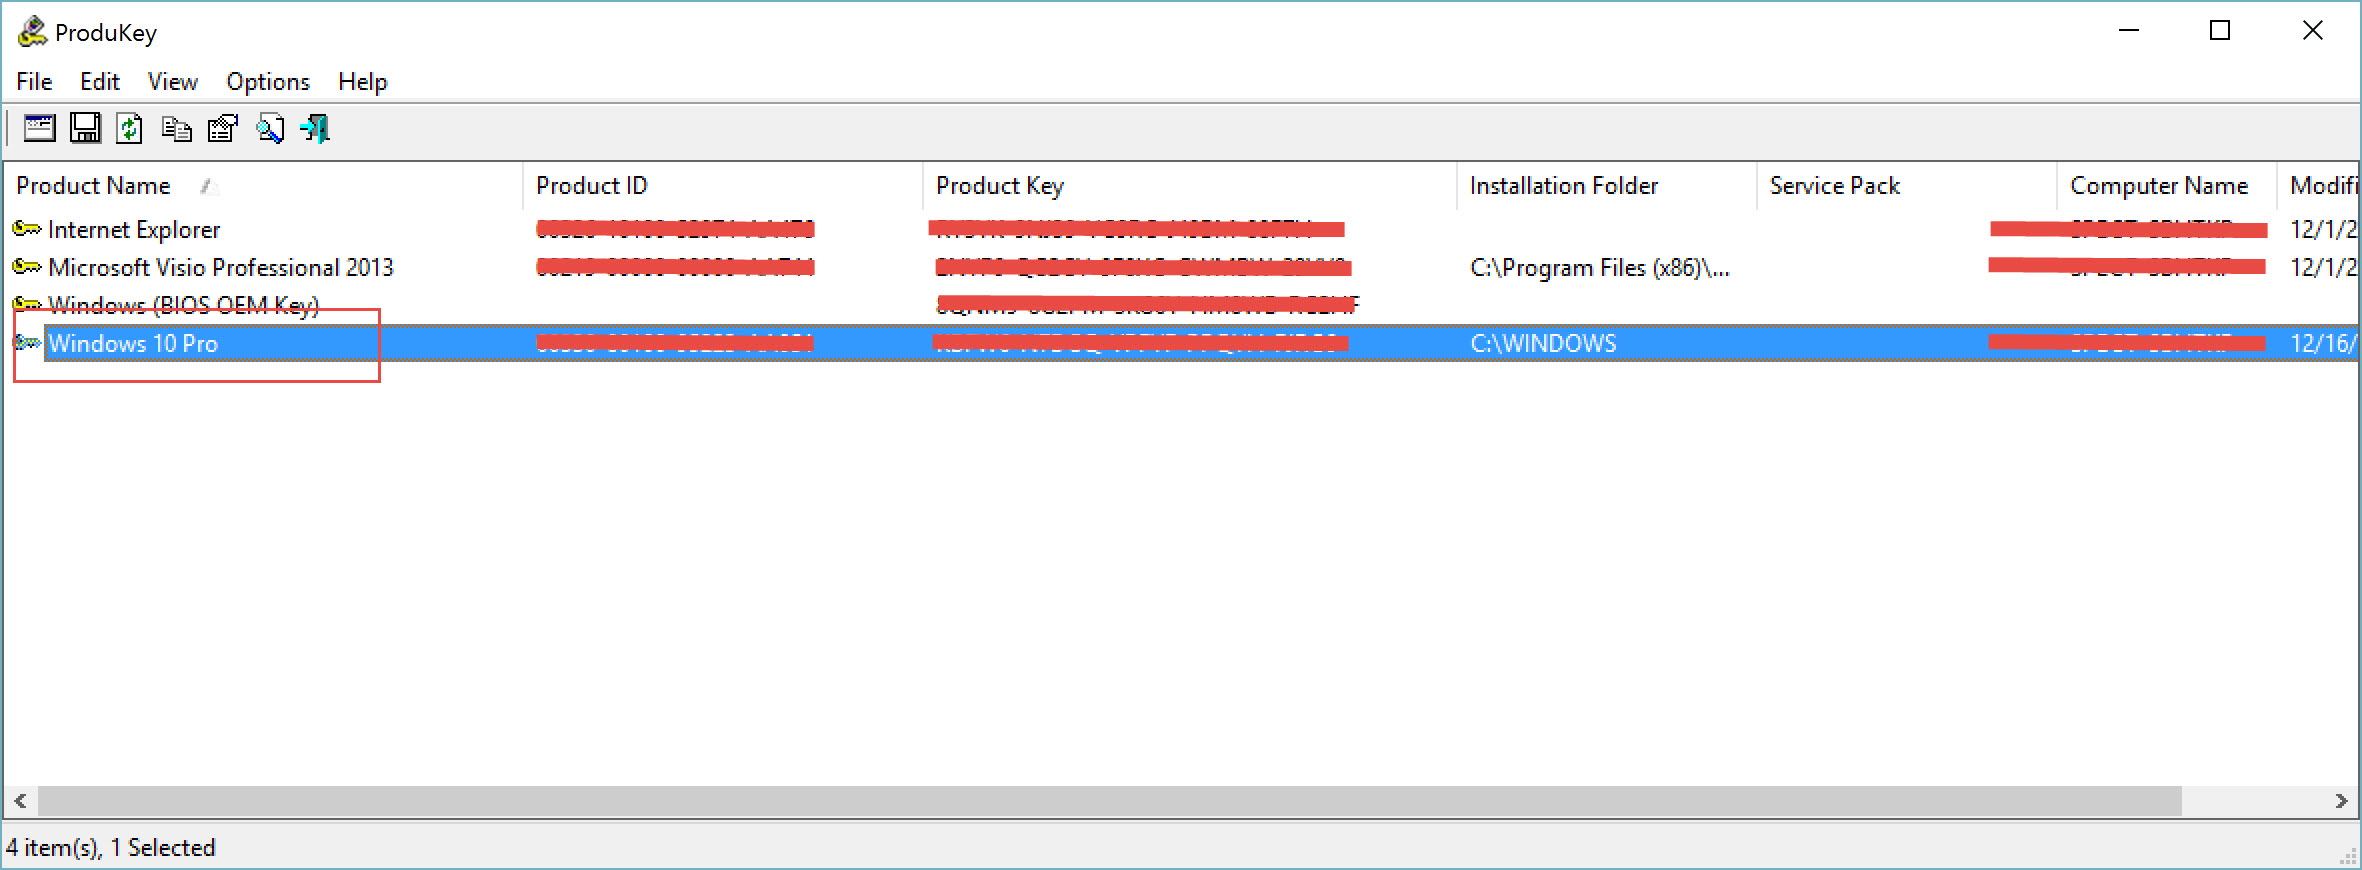 A Free for Recovering Lost Product Keys for 10, Windows Server 2012 R2 - Petri Knowledgebase